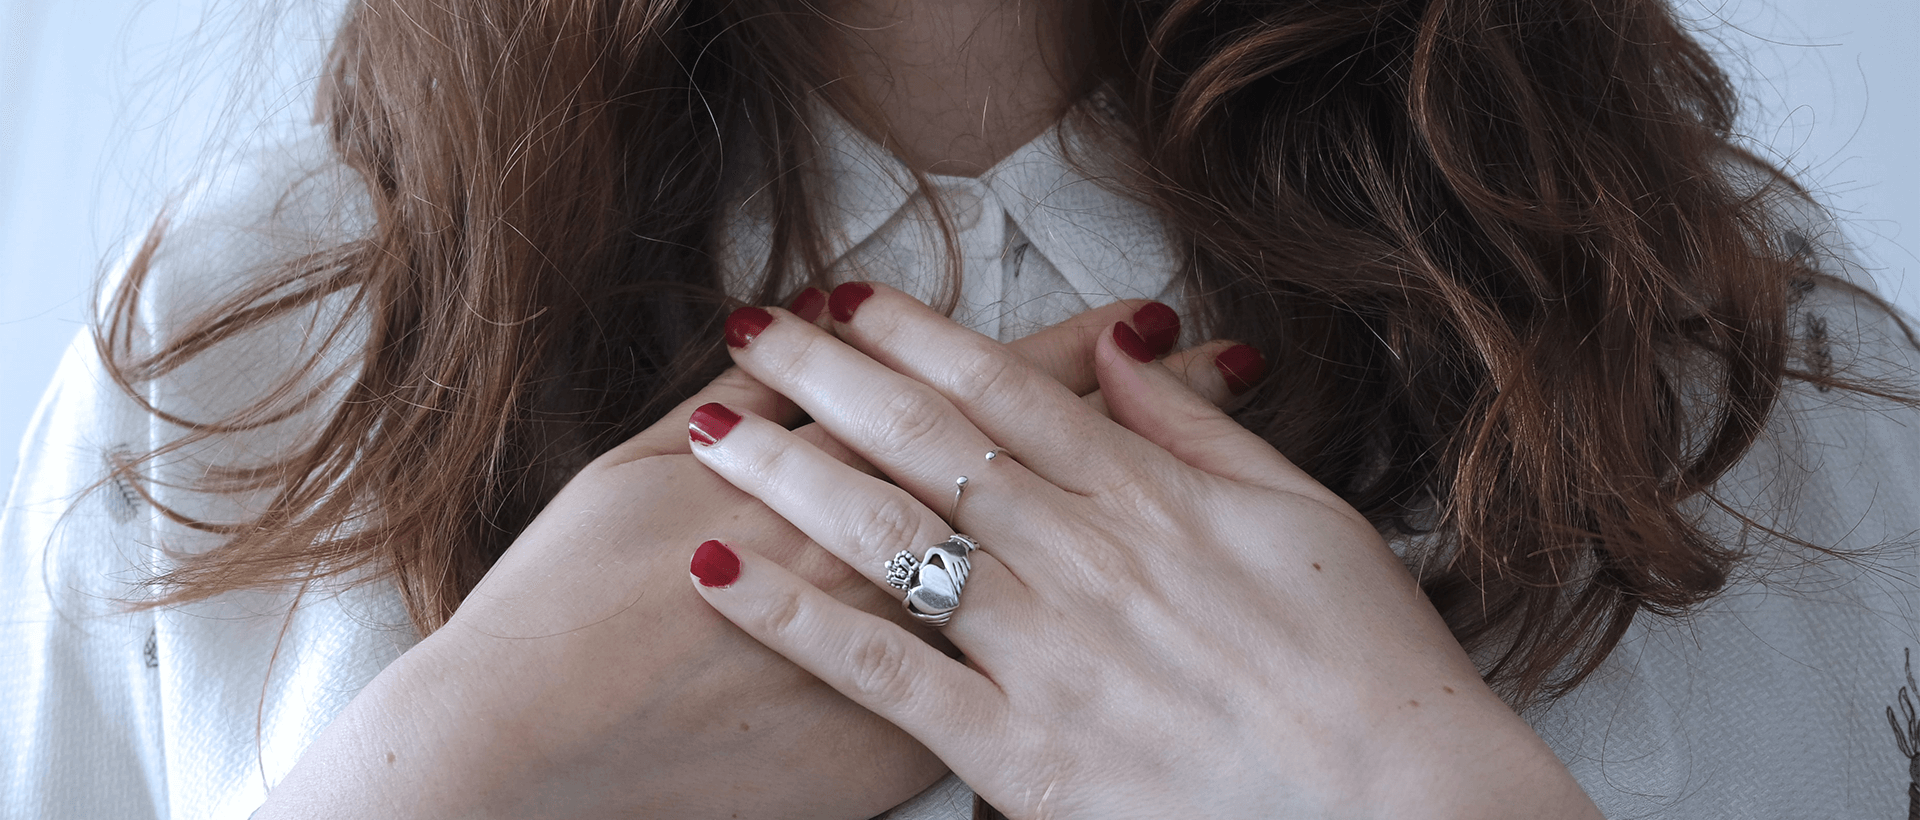 a woman with red nails and a ring on her hand.